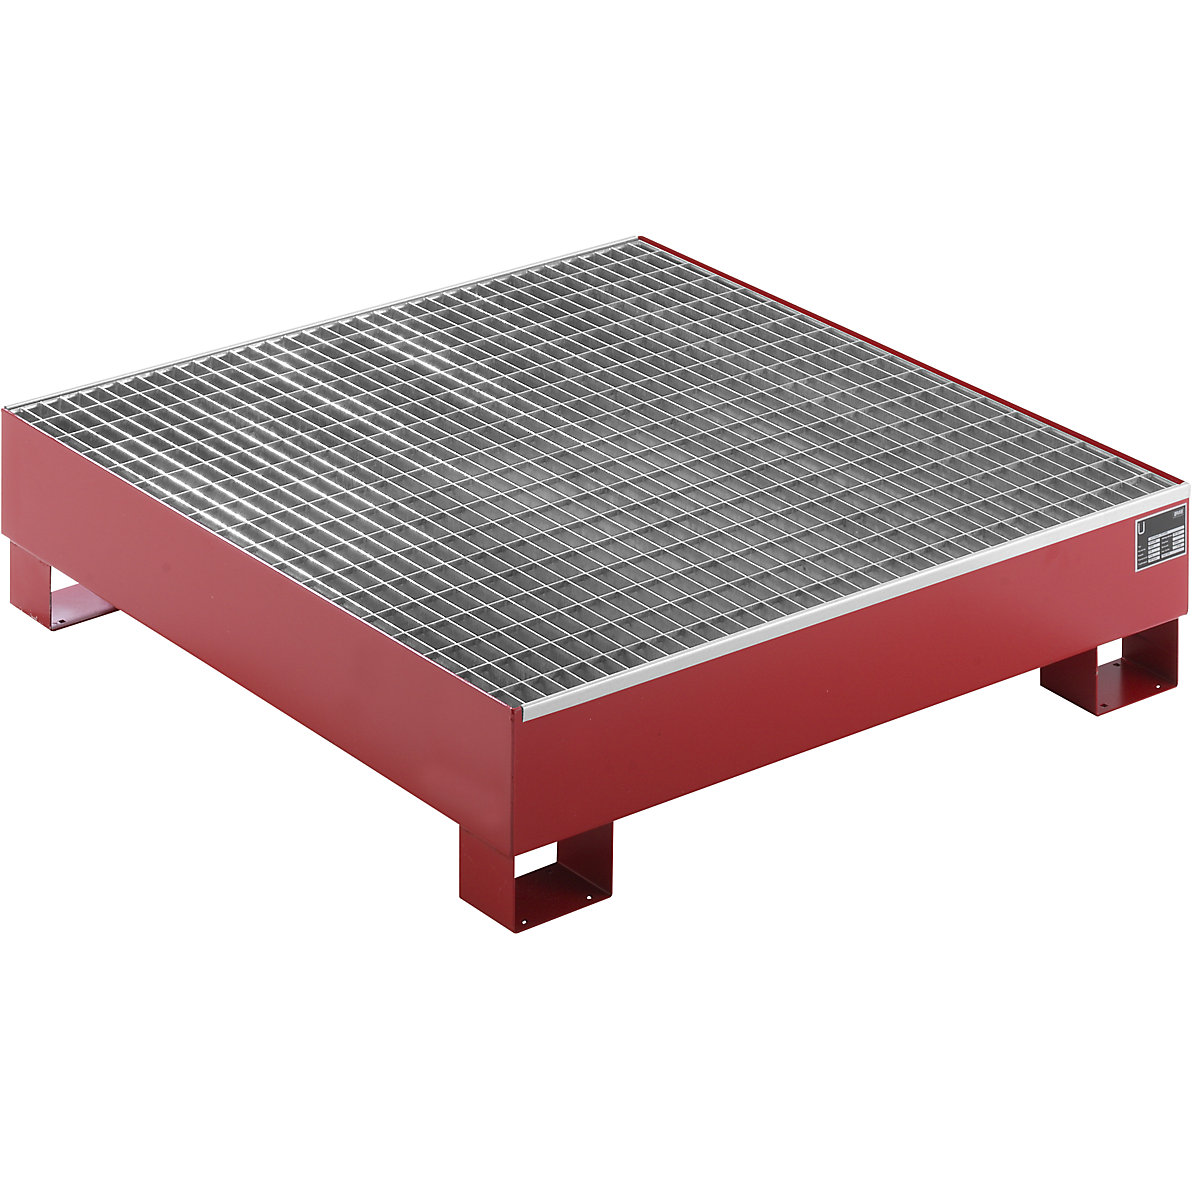 EUROKRAFTbasic – Sump tray made from sheet steel, LxWxH 1200 x 1200 x 285 mm, red RAL 3000, with grate